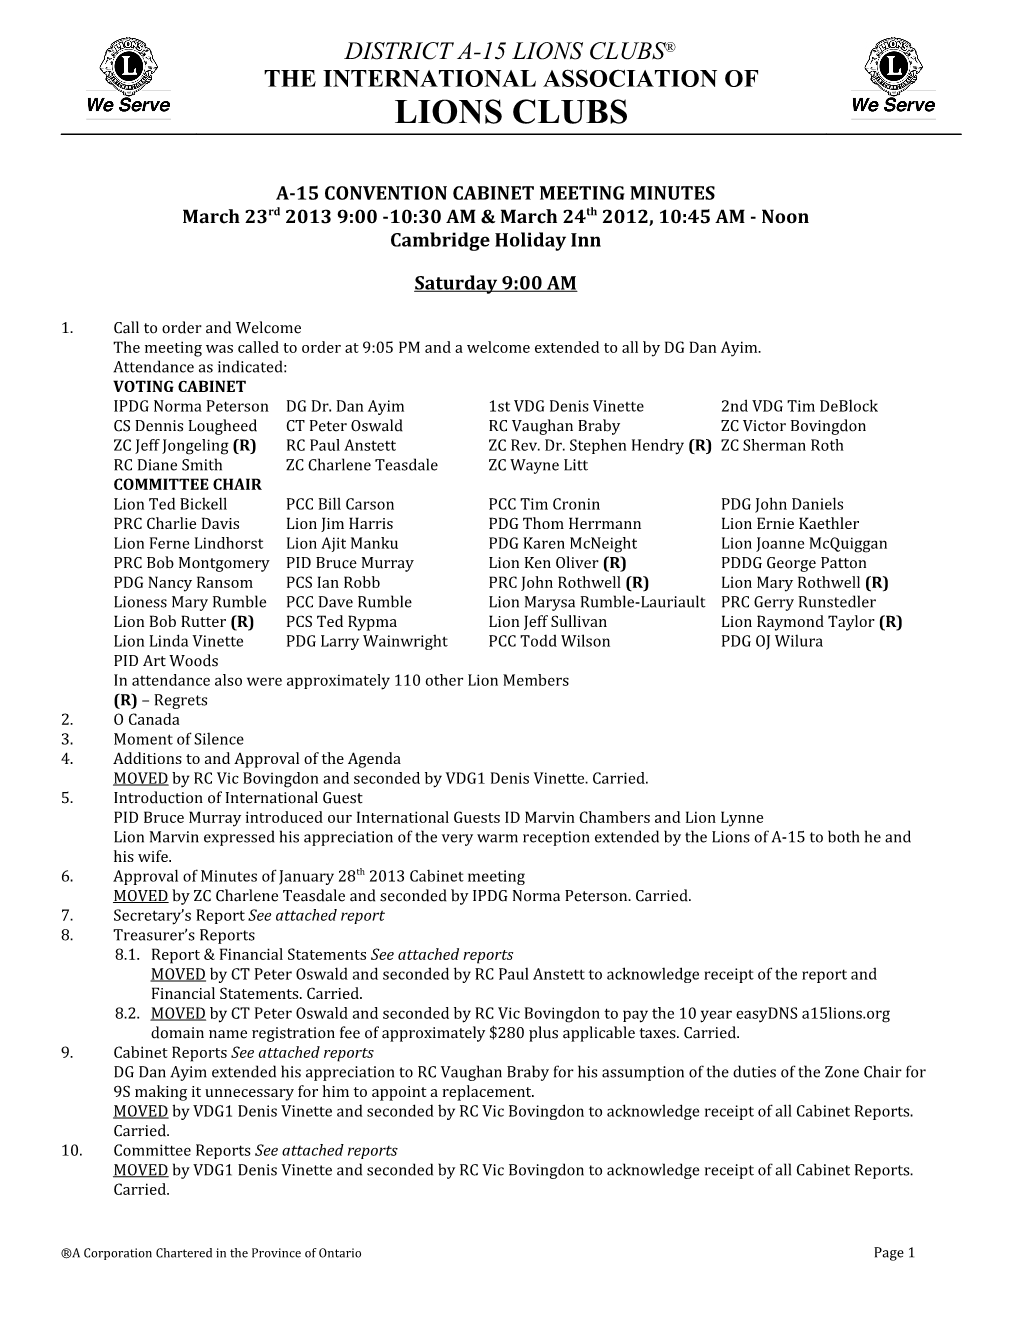 A-15 Convention Cabinet Meetingminutes